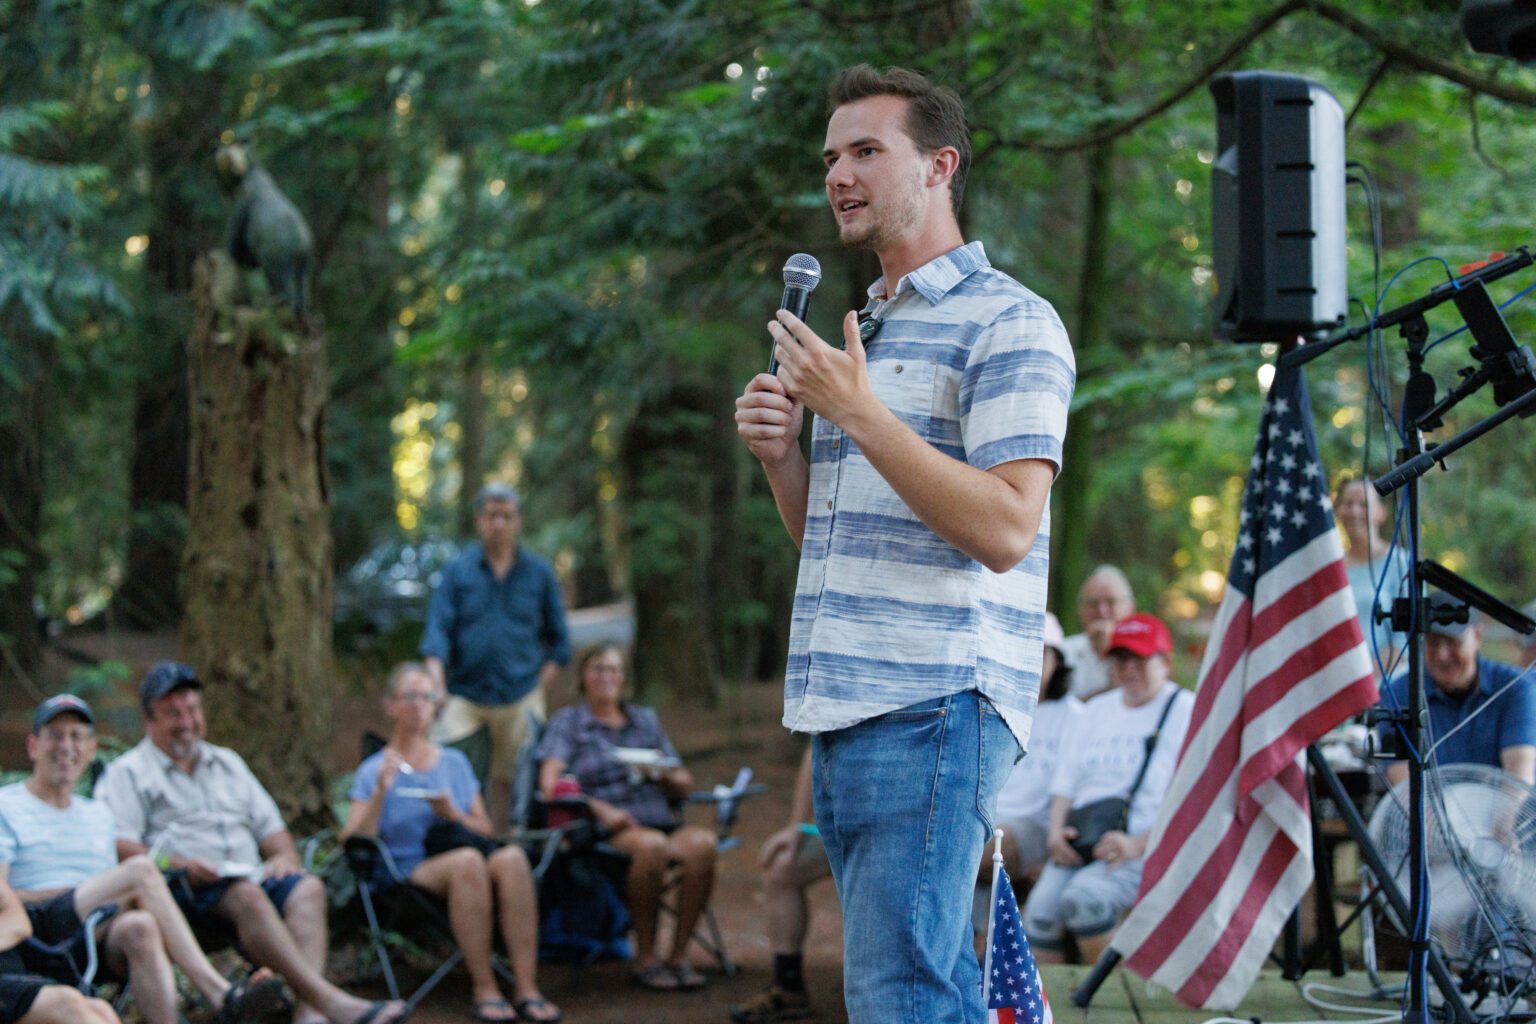 State Sen. Simon Sefzik speaks to voters at a Republican Party picnic near Ferndale on July 29. Sefzik's campaign has raised $747